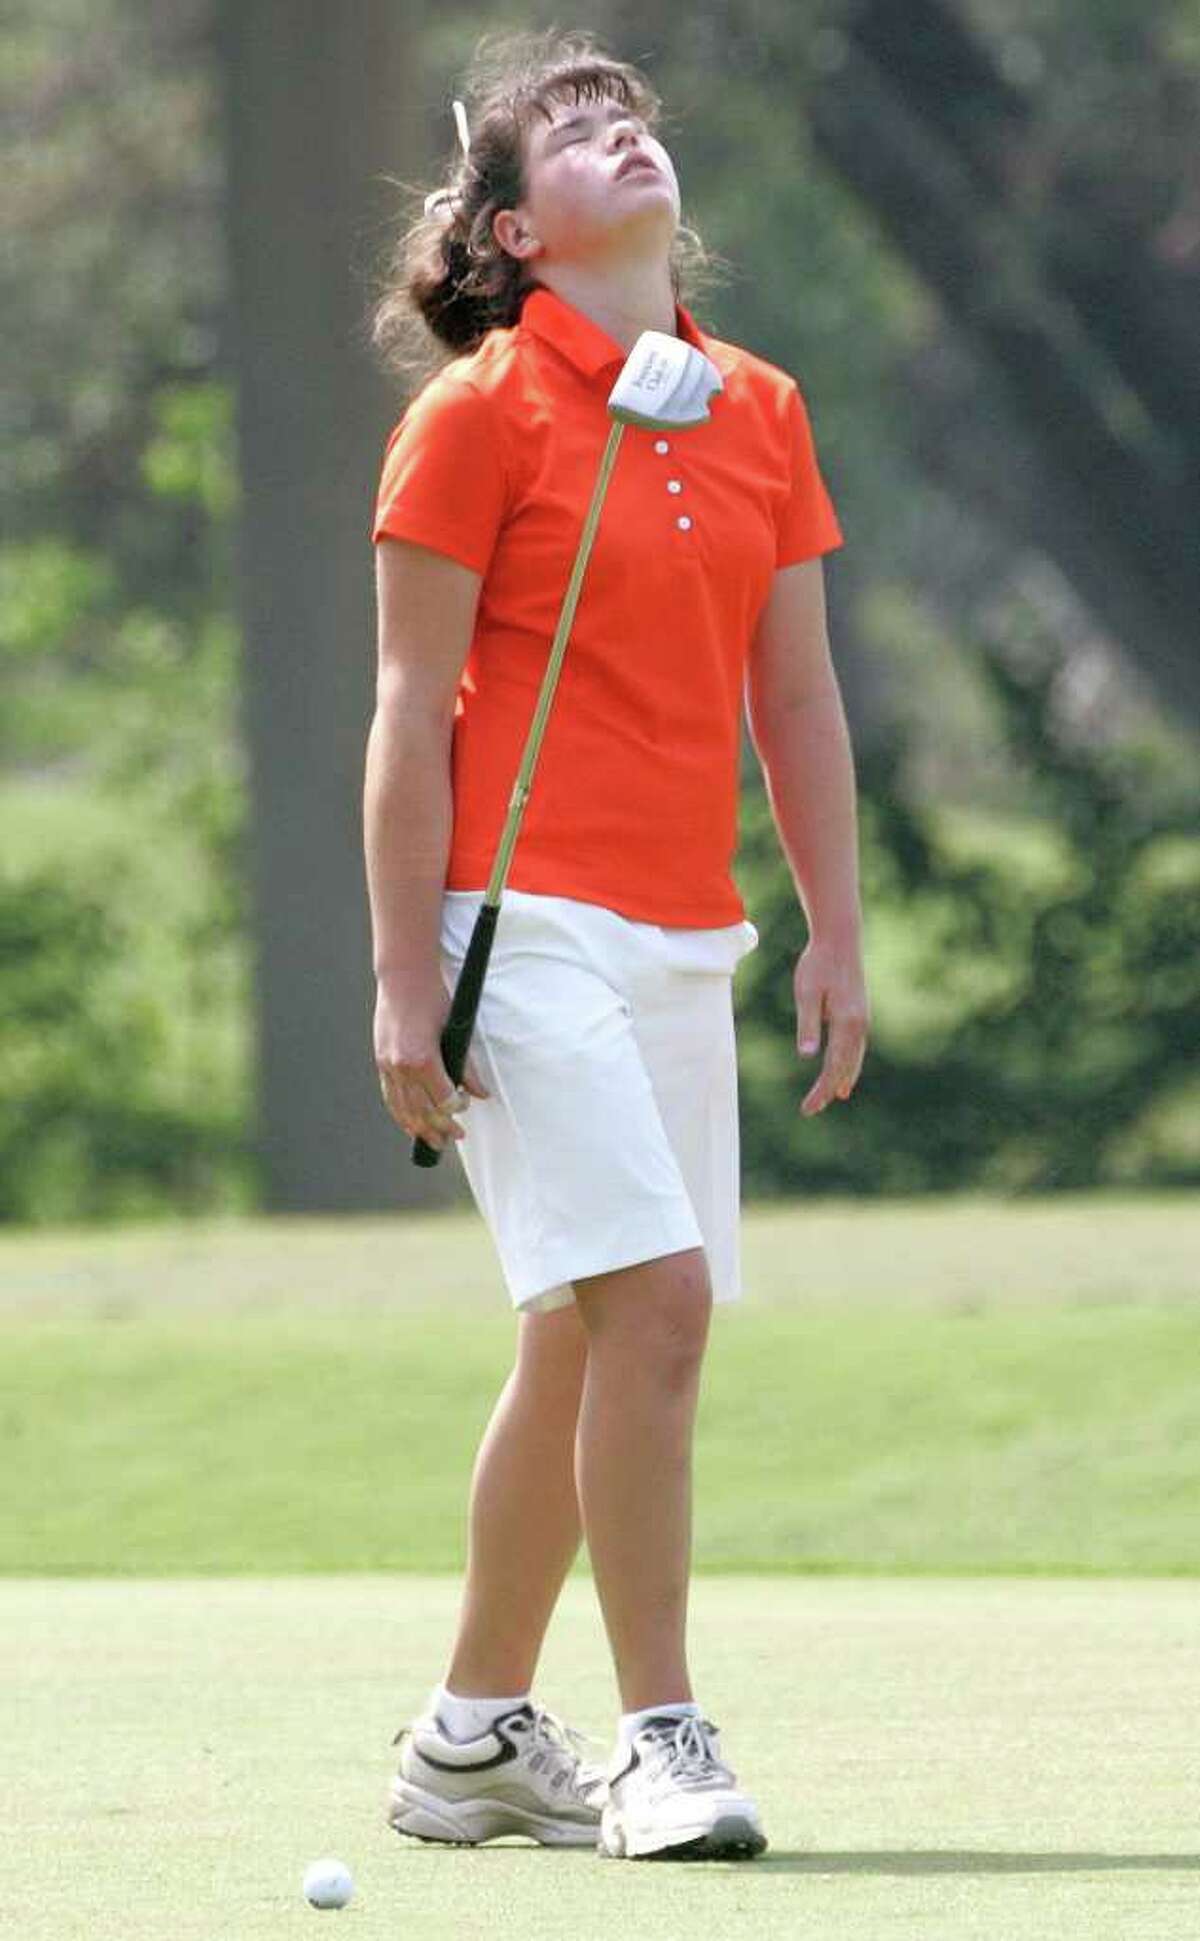 Medina Valley's Erin Noonan reacts with frustration to missing a short putt on the first hole Monday, April 18, 2011, in the first round of the Region IV-4A girls' golf tournament at Pecan Valley Golf Course.